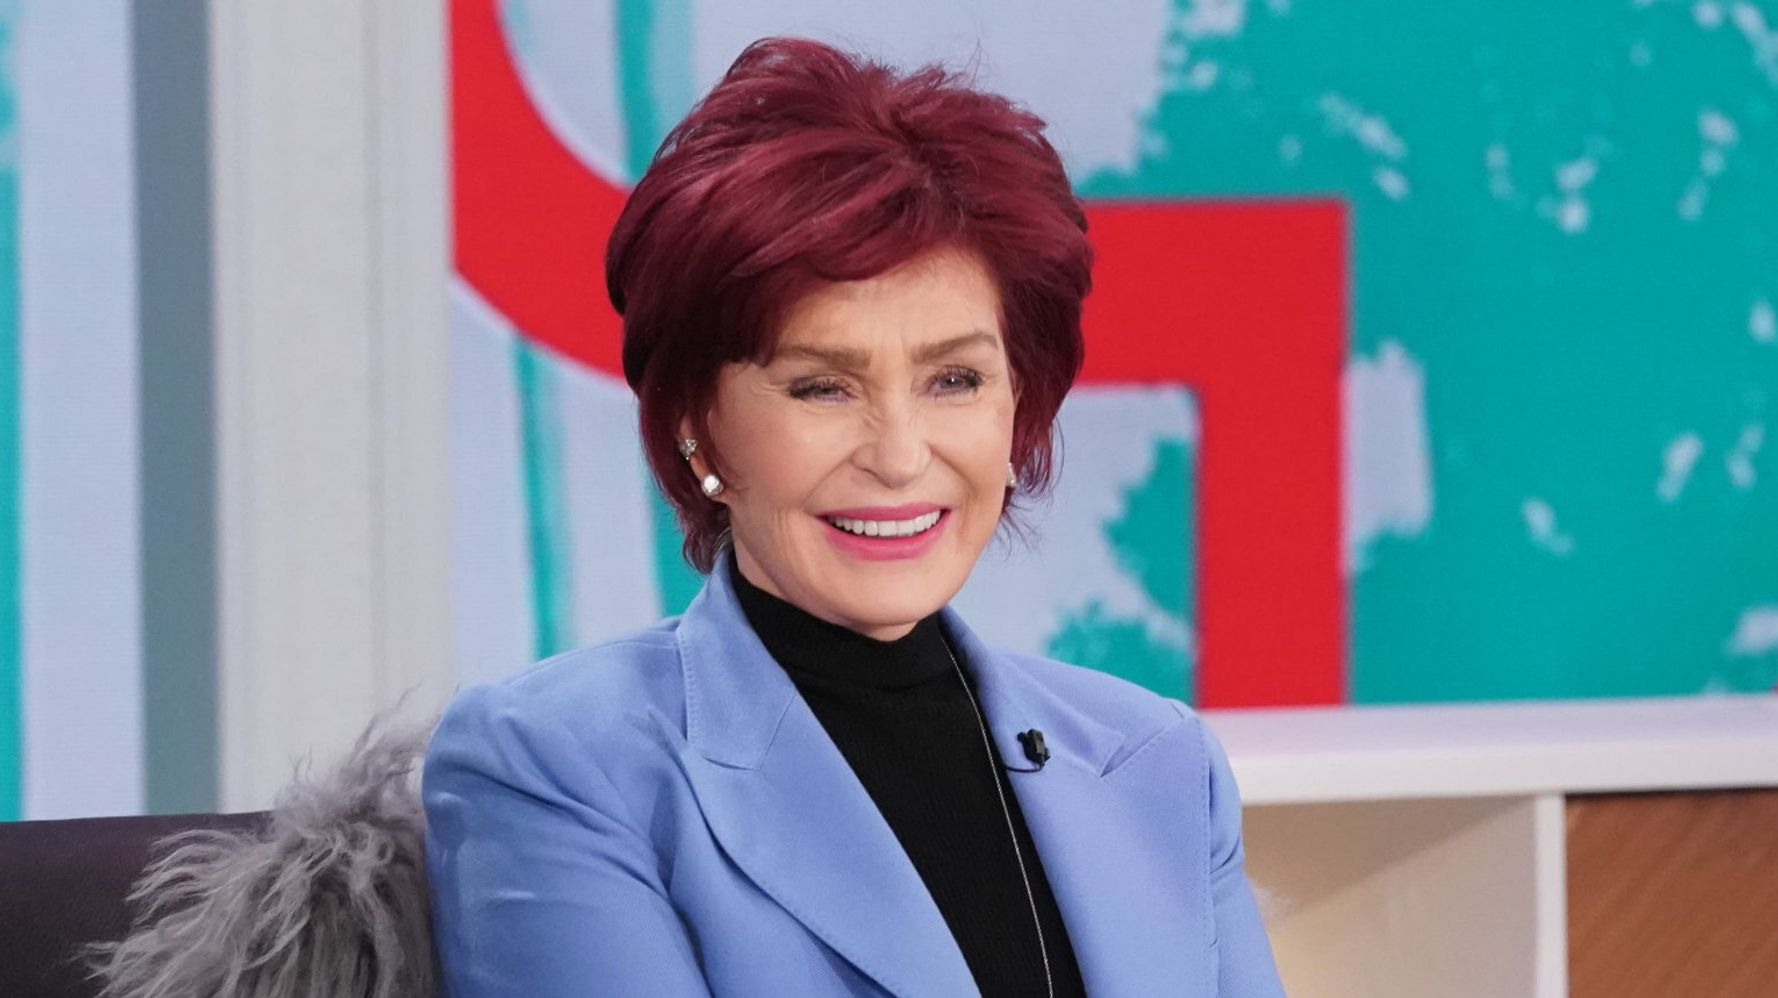 Leah Remini: Sharon Osbourne called co-hosts “Discussions” Offensive Offensive